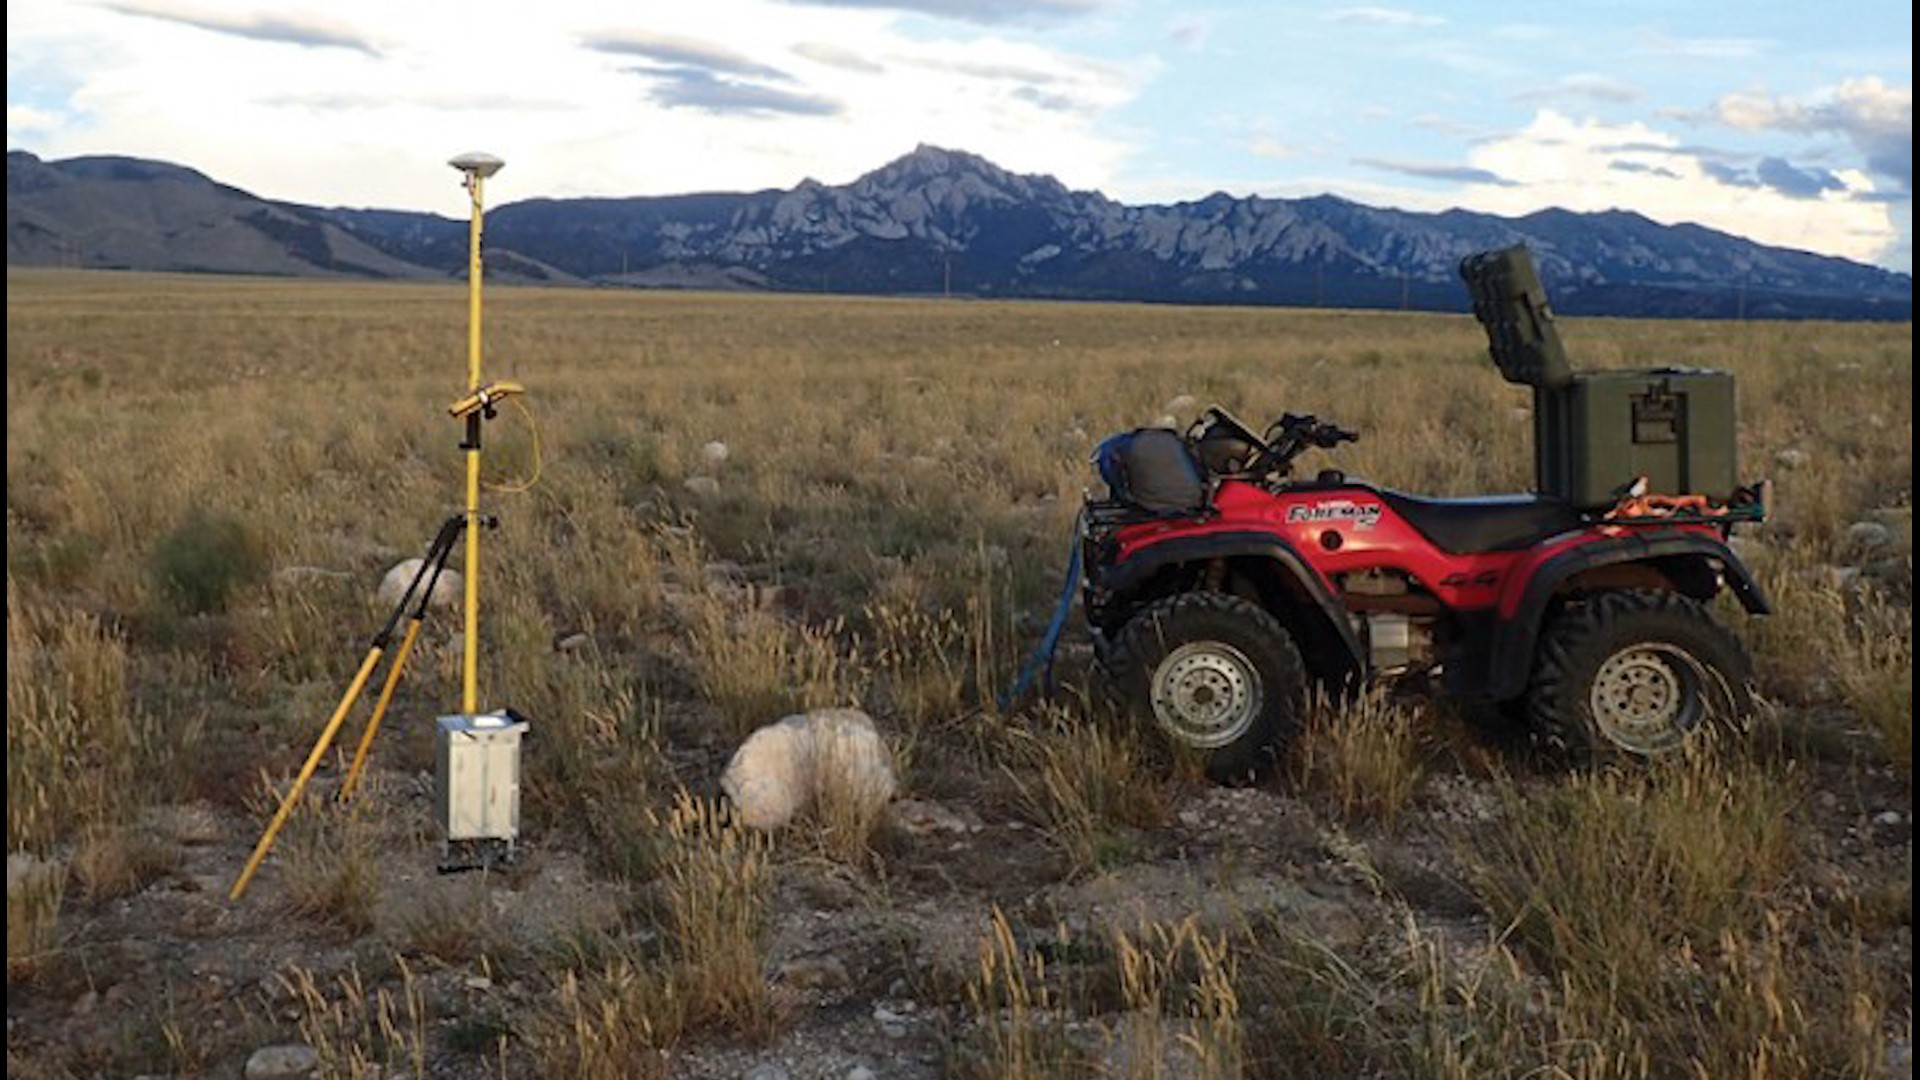 Scientists think seismic activity beneath Utah's Sevier Desert points to an ancient, active volcanic complex.